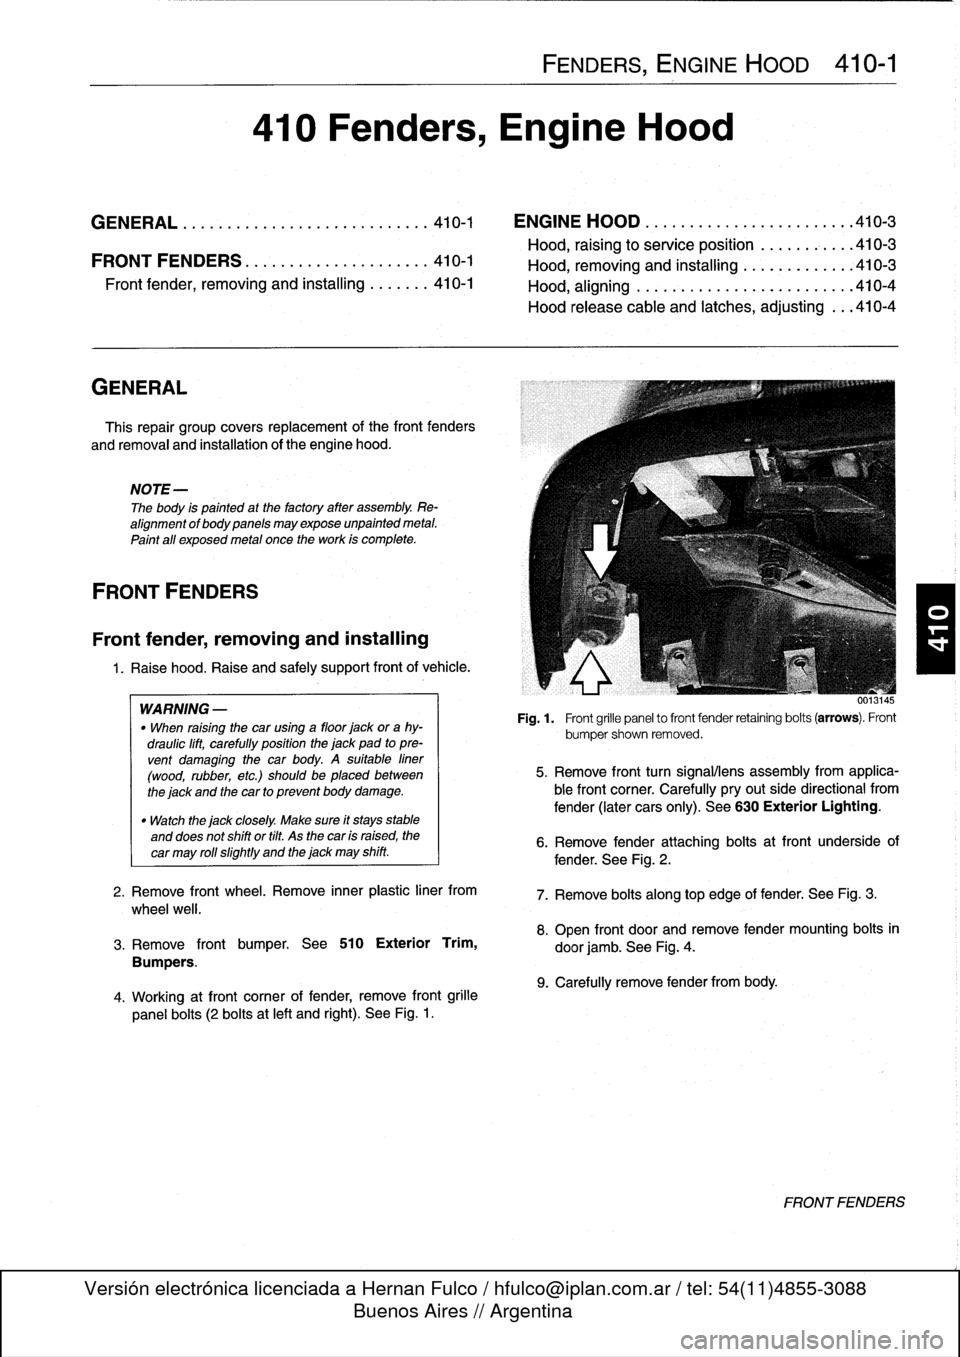 BMW 318i 1996 E36 Workshop Manual 
GENERAL

This
repair
group
covers
replacement
of
the
front
fenders

and
removal
and
installation
of
the
engine
hood
.

NOTE-

The
body
is
painted
at
the
factoryafter
assembly
.
Re-
alignment
of
body
